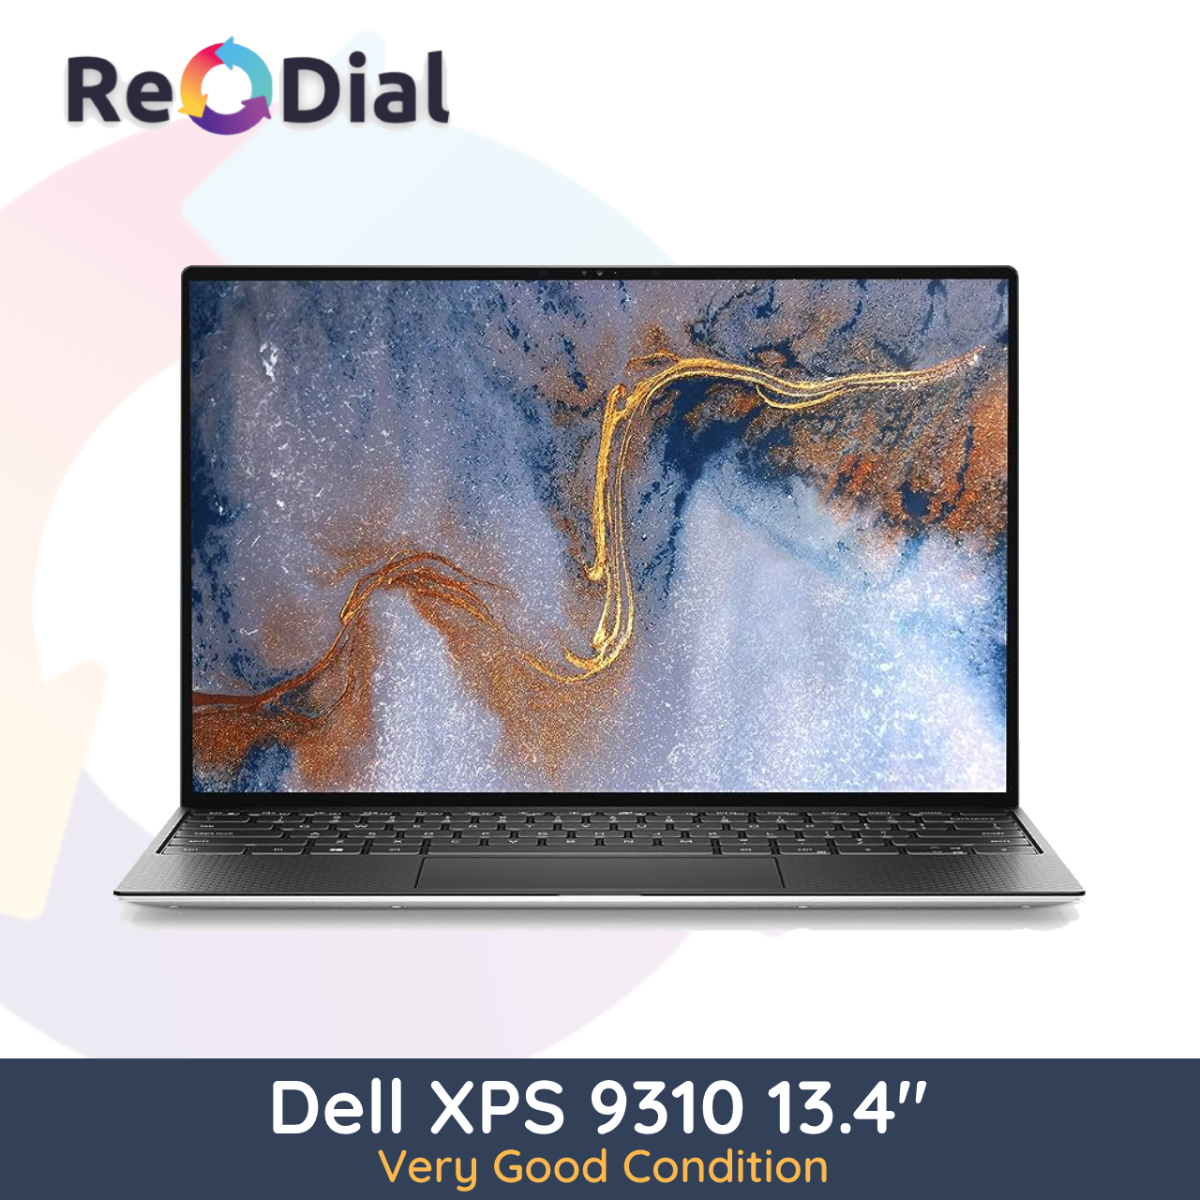 Dell XPS 13 (9310) 13.4" i7-1165G7 512Gb 16Gb  - Very Good Condition